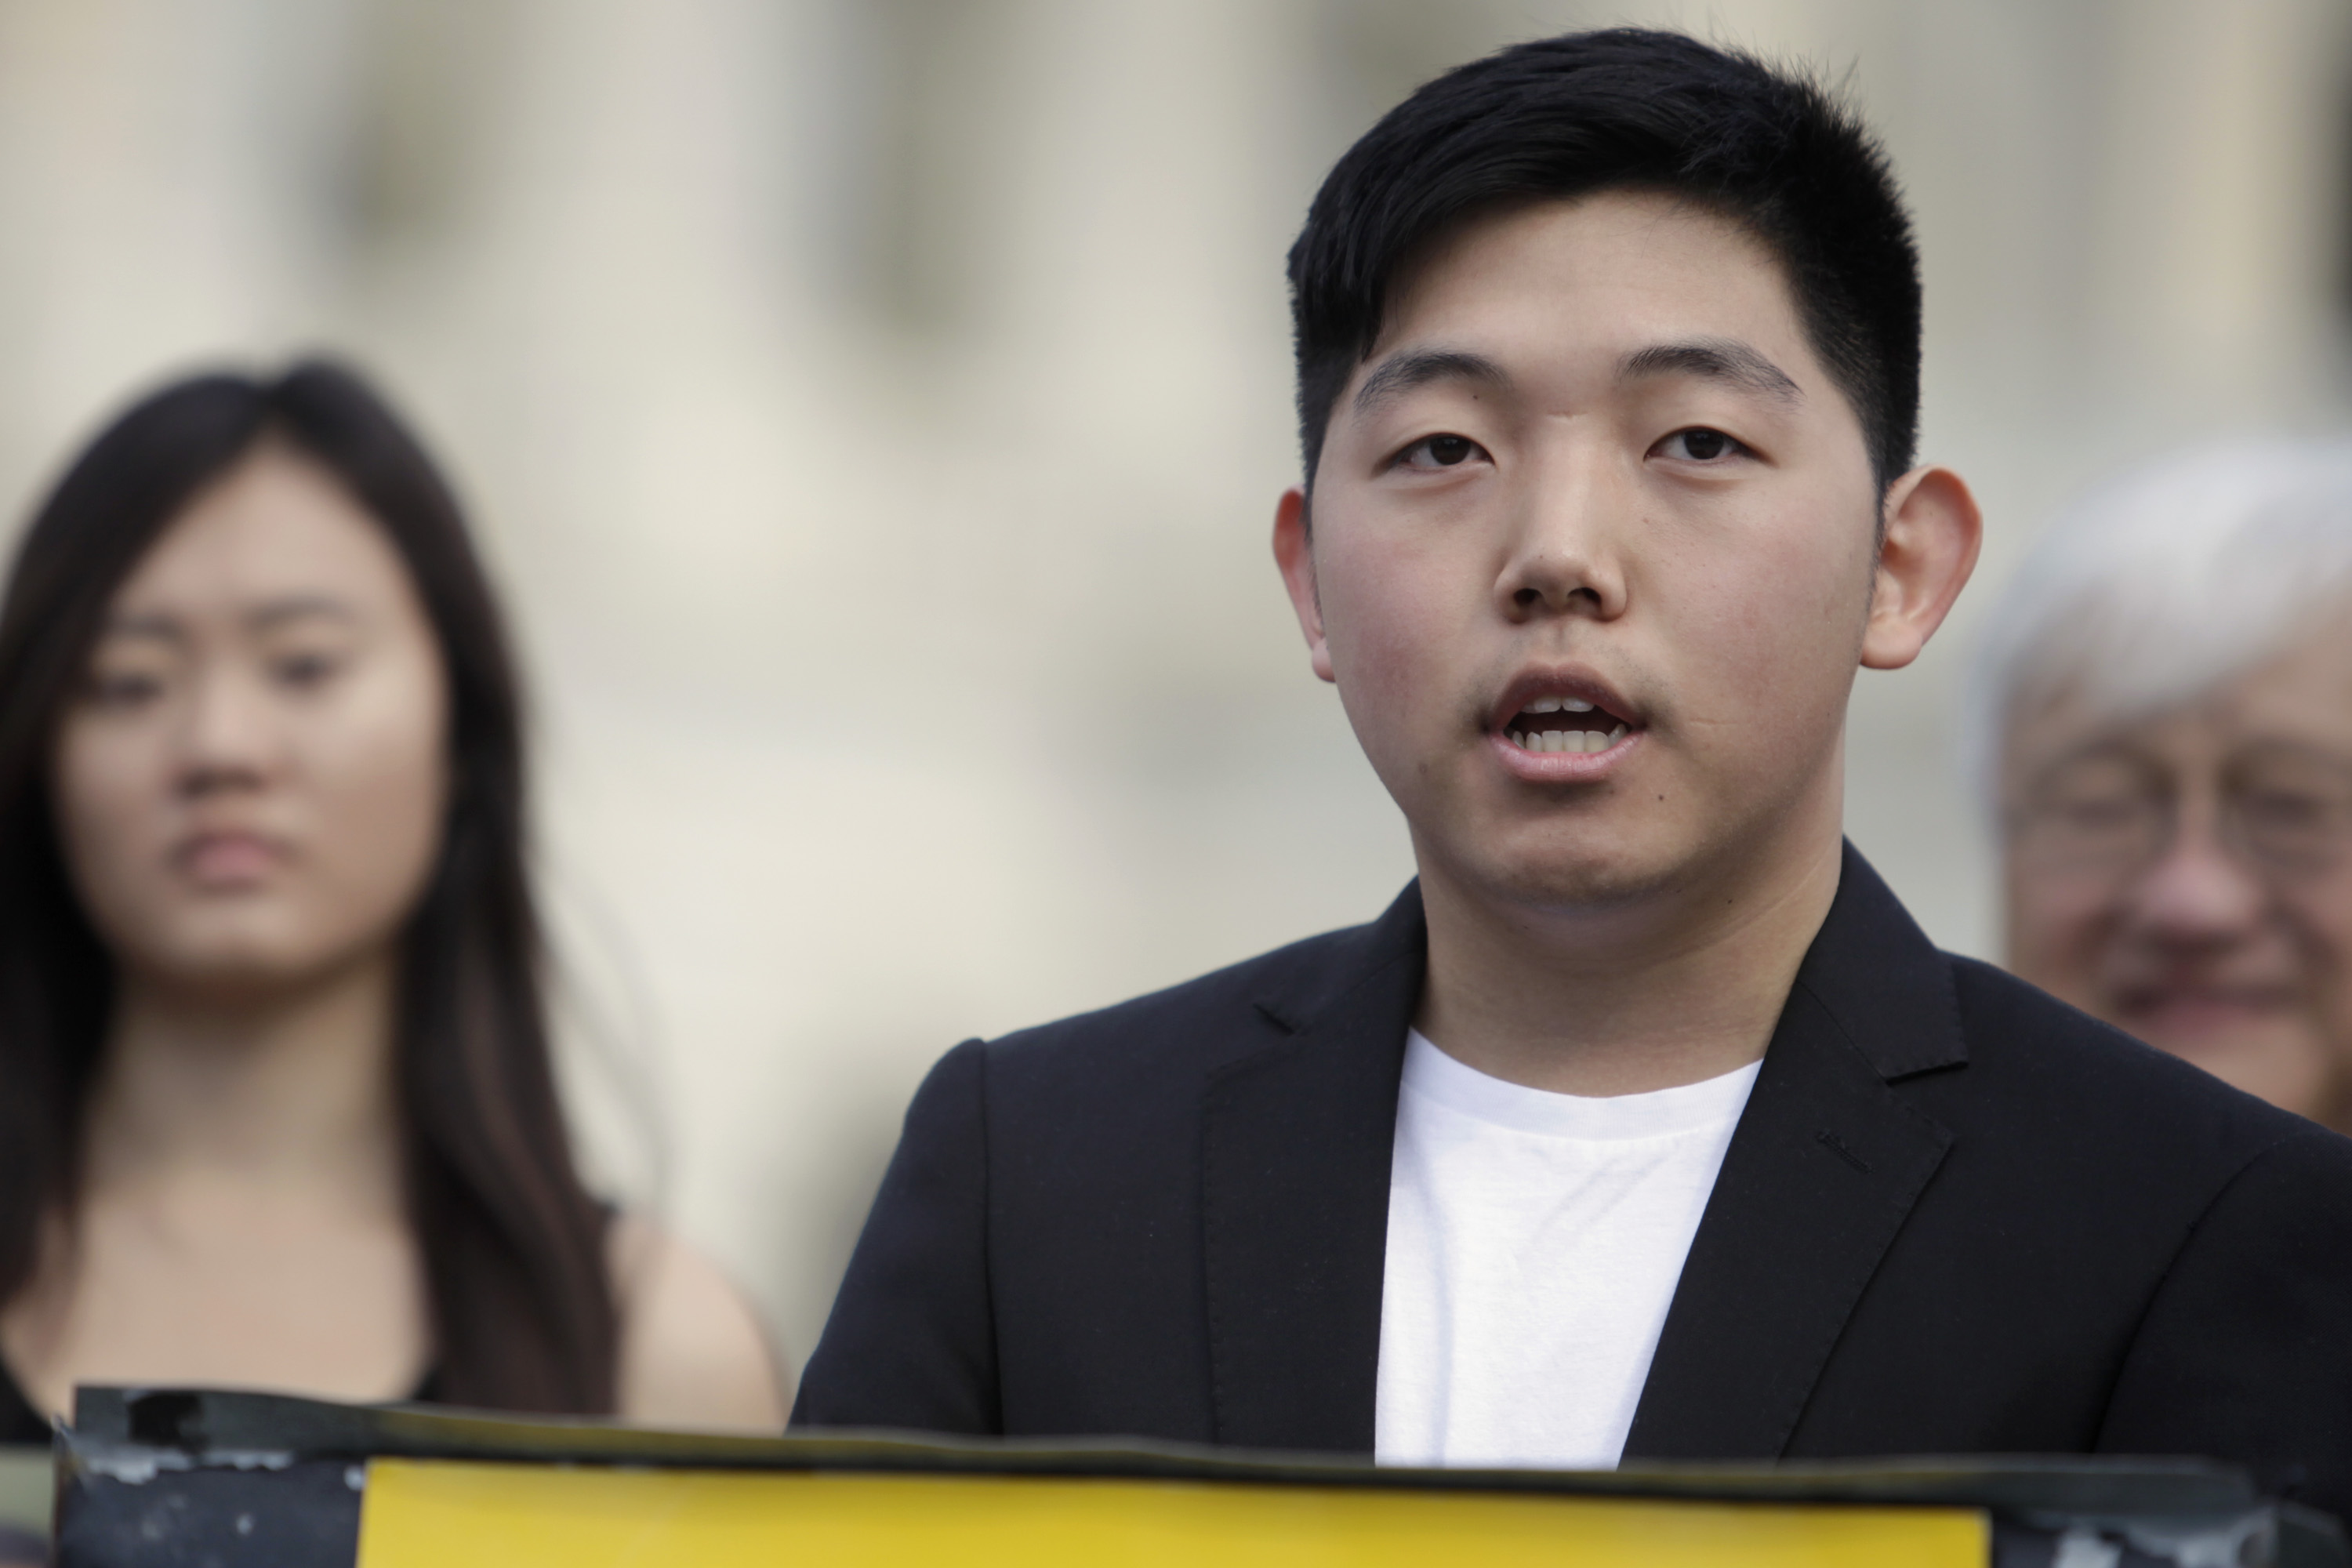 Simon Jun, an undocumented student and DREAM rider, speaks publicly for the first time about his situation. He says that Congress needs to pass immigration reform for the families living in the shadows. (Rob Denton/SHFWire)